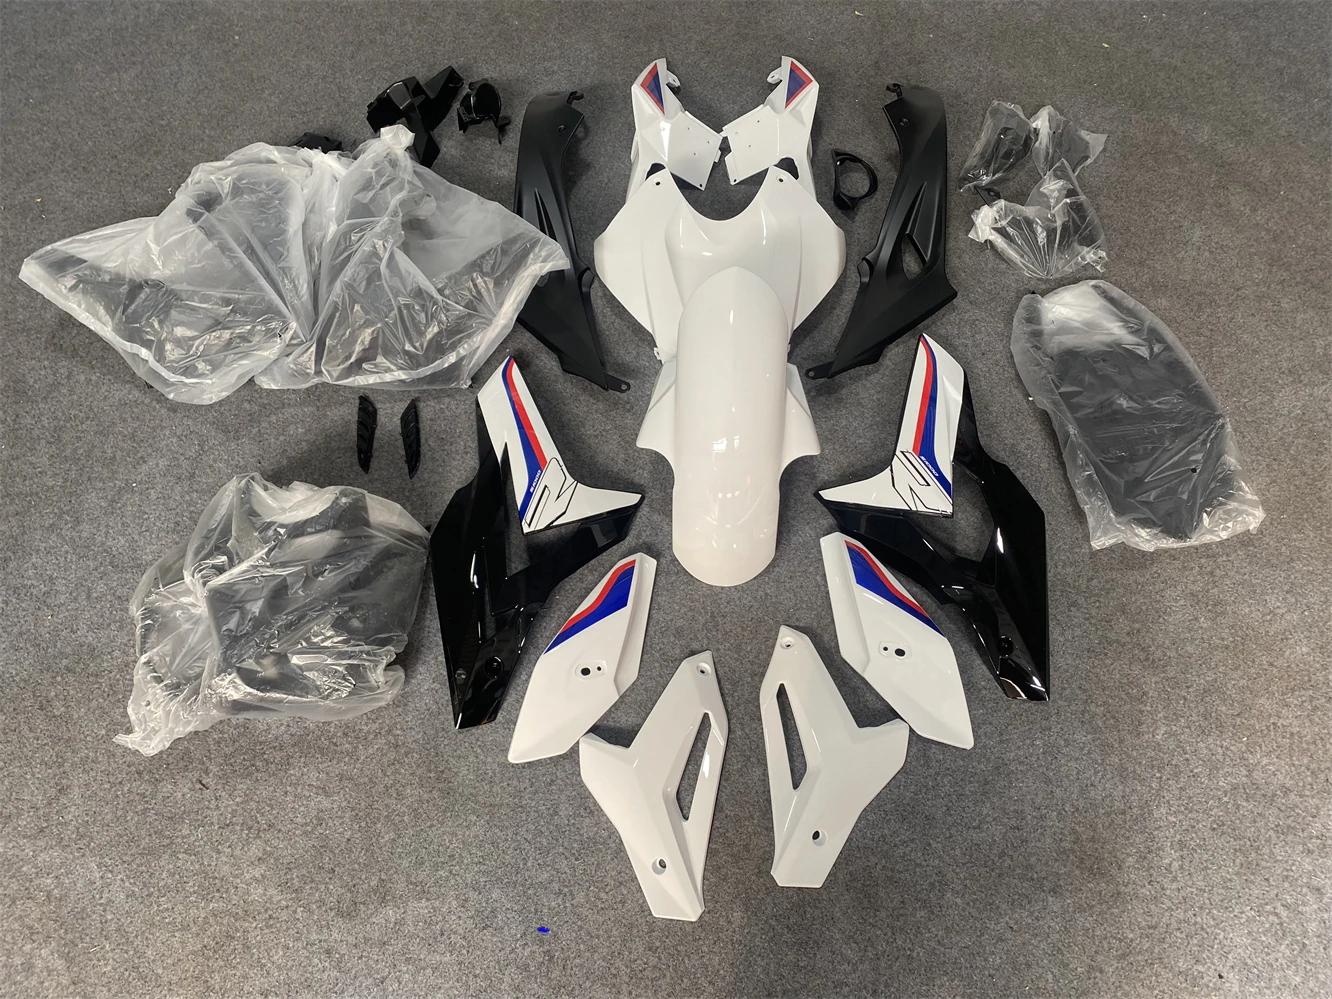 

Motorcycle Bodywork Cowling Accessories Full Fairing Kits for S1000R 2015-2016-2017 Injection Molding S1000 R 15-16-17Motorcycle